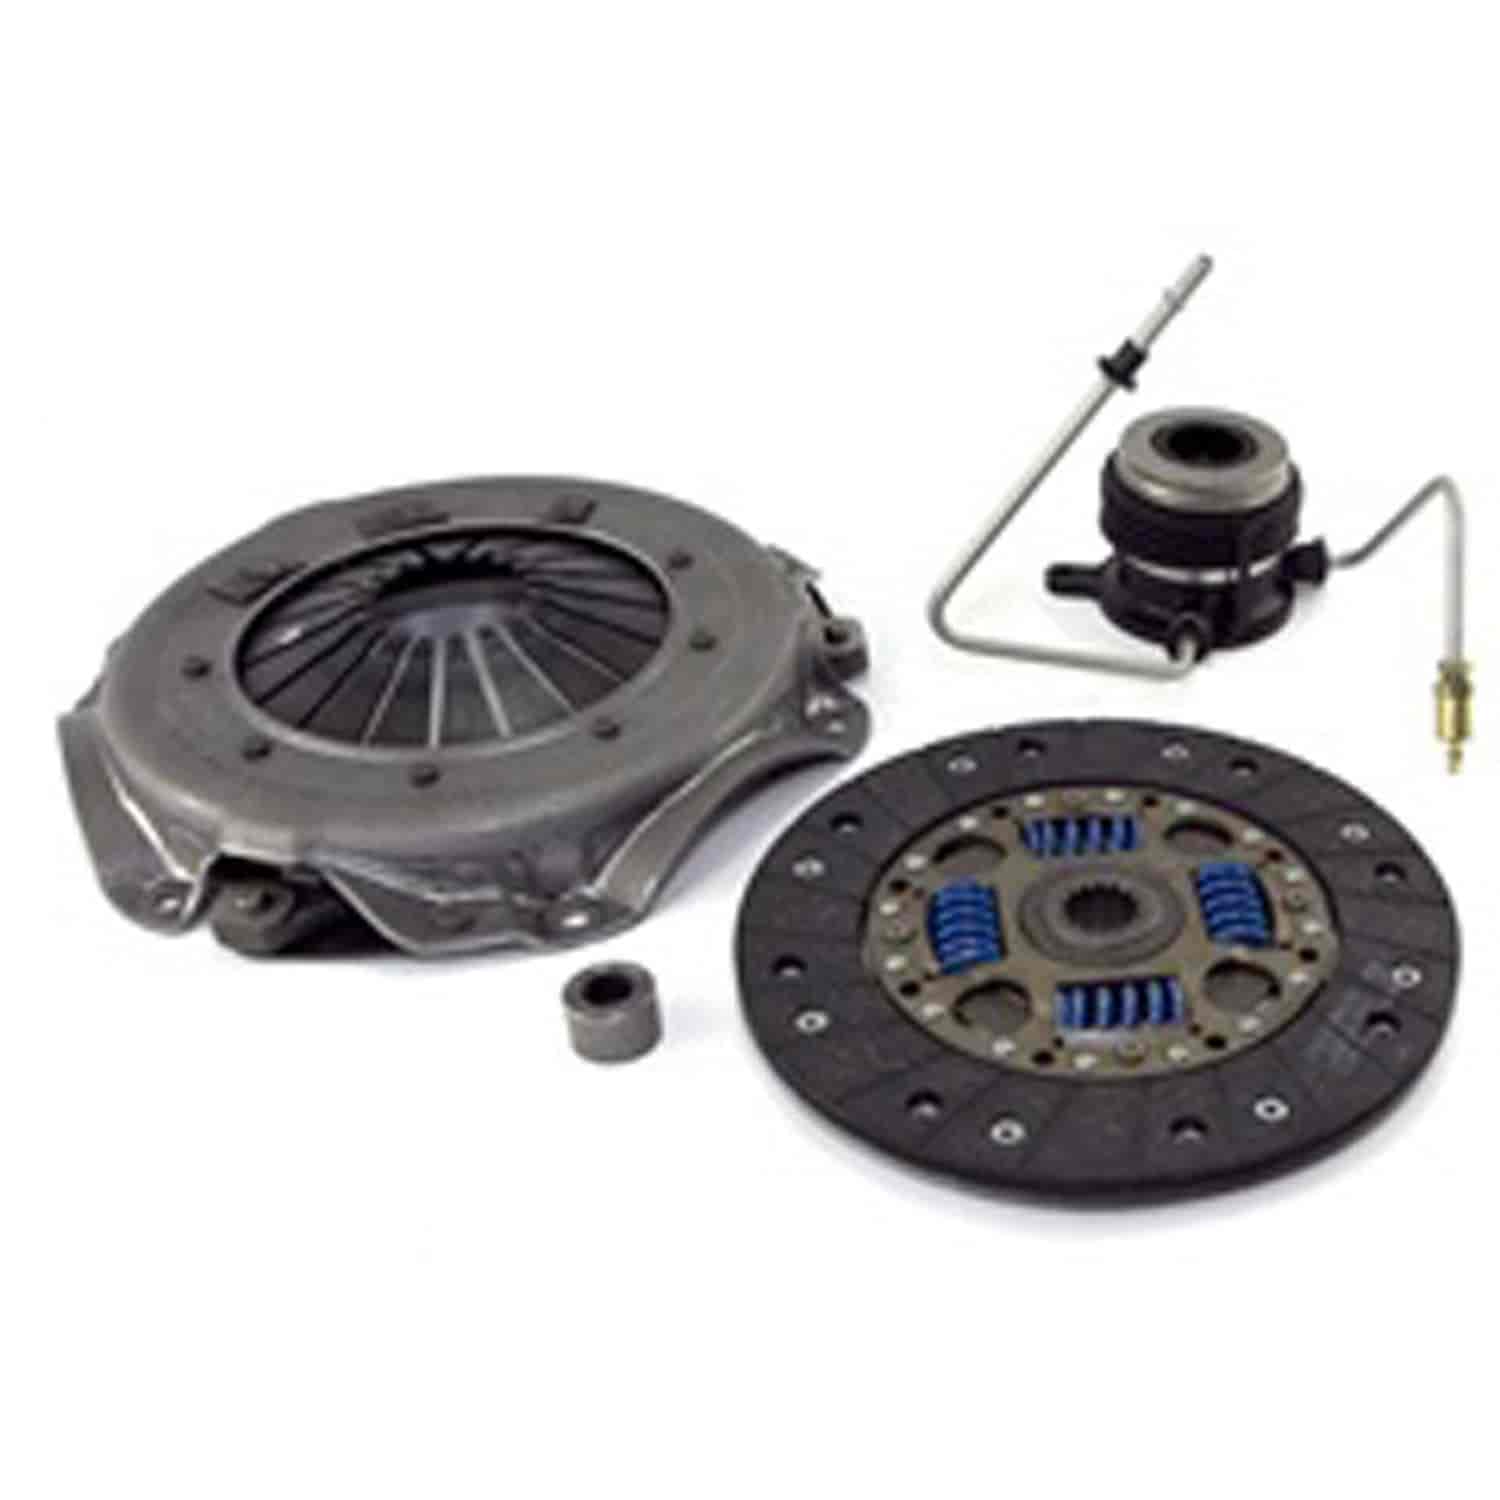 Master Clutch Kit 93 Wrangler 2.5L. The master kit includes the pressure plate clutch disc throw-out